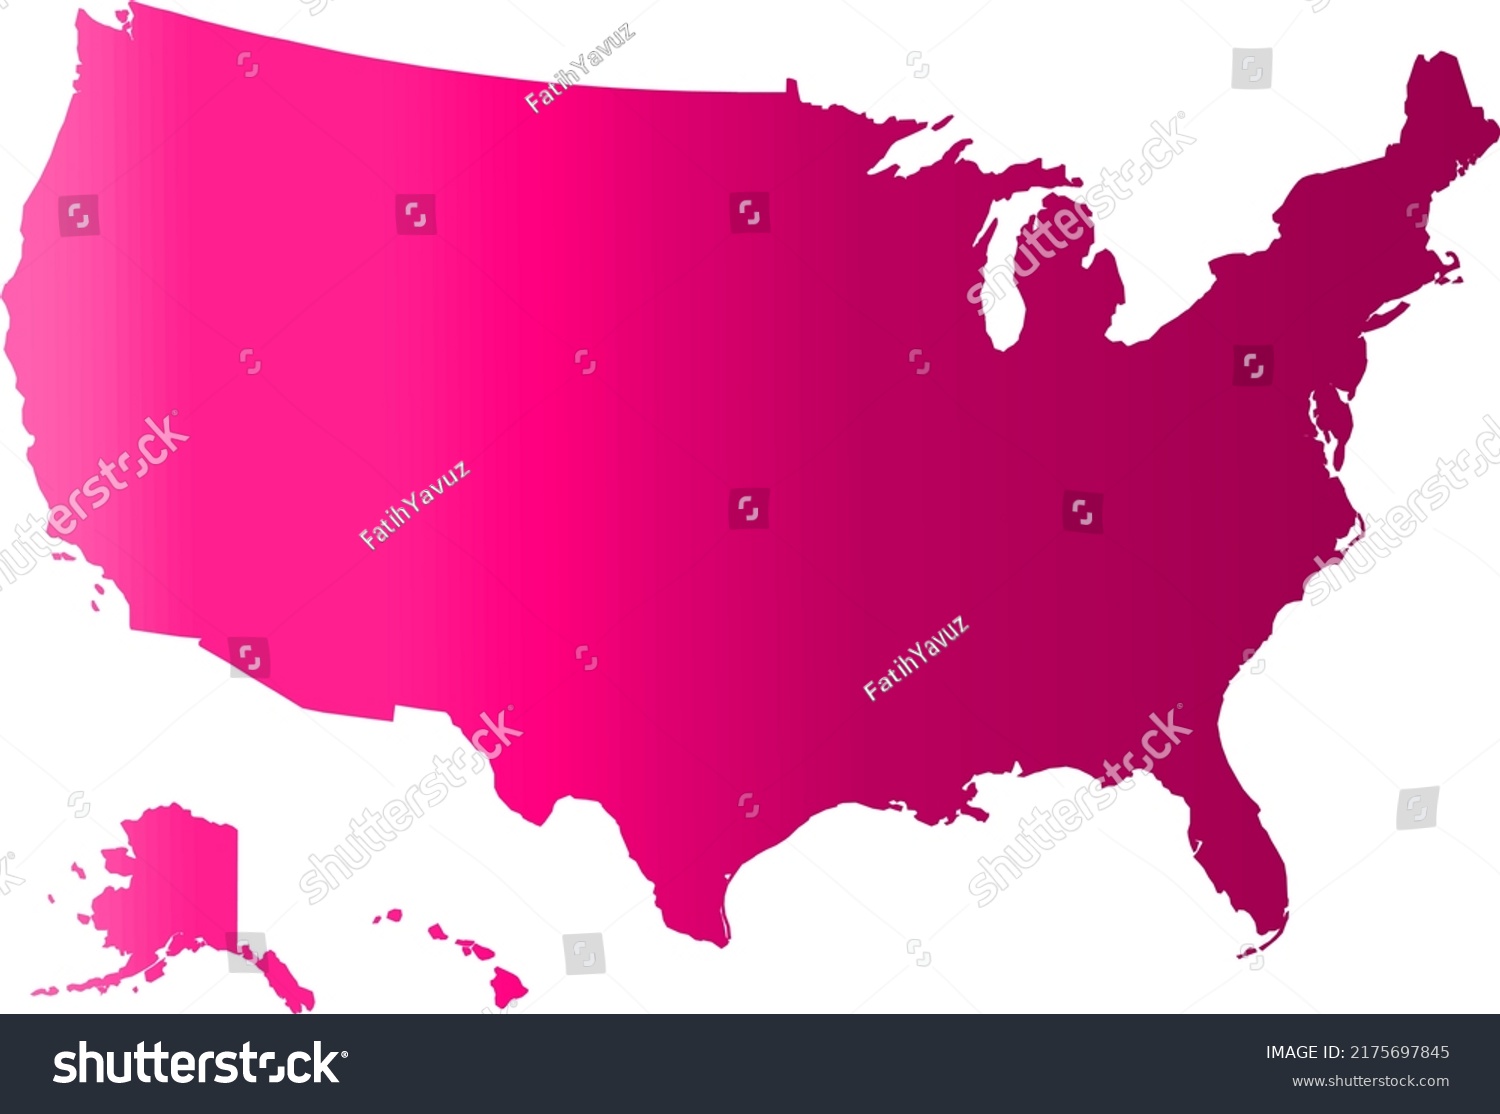 Usa Map Vector Pink Color Gradient Stock Vector Royalty Free 2175697845 Shutterstock 9499